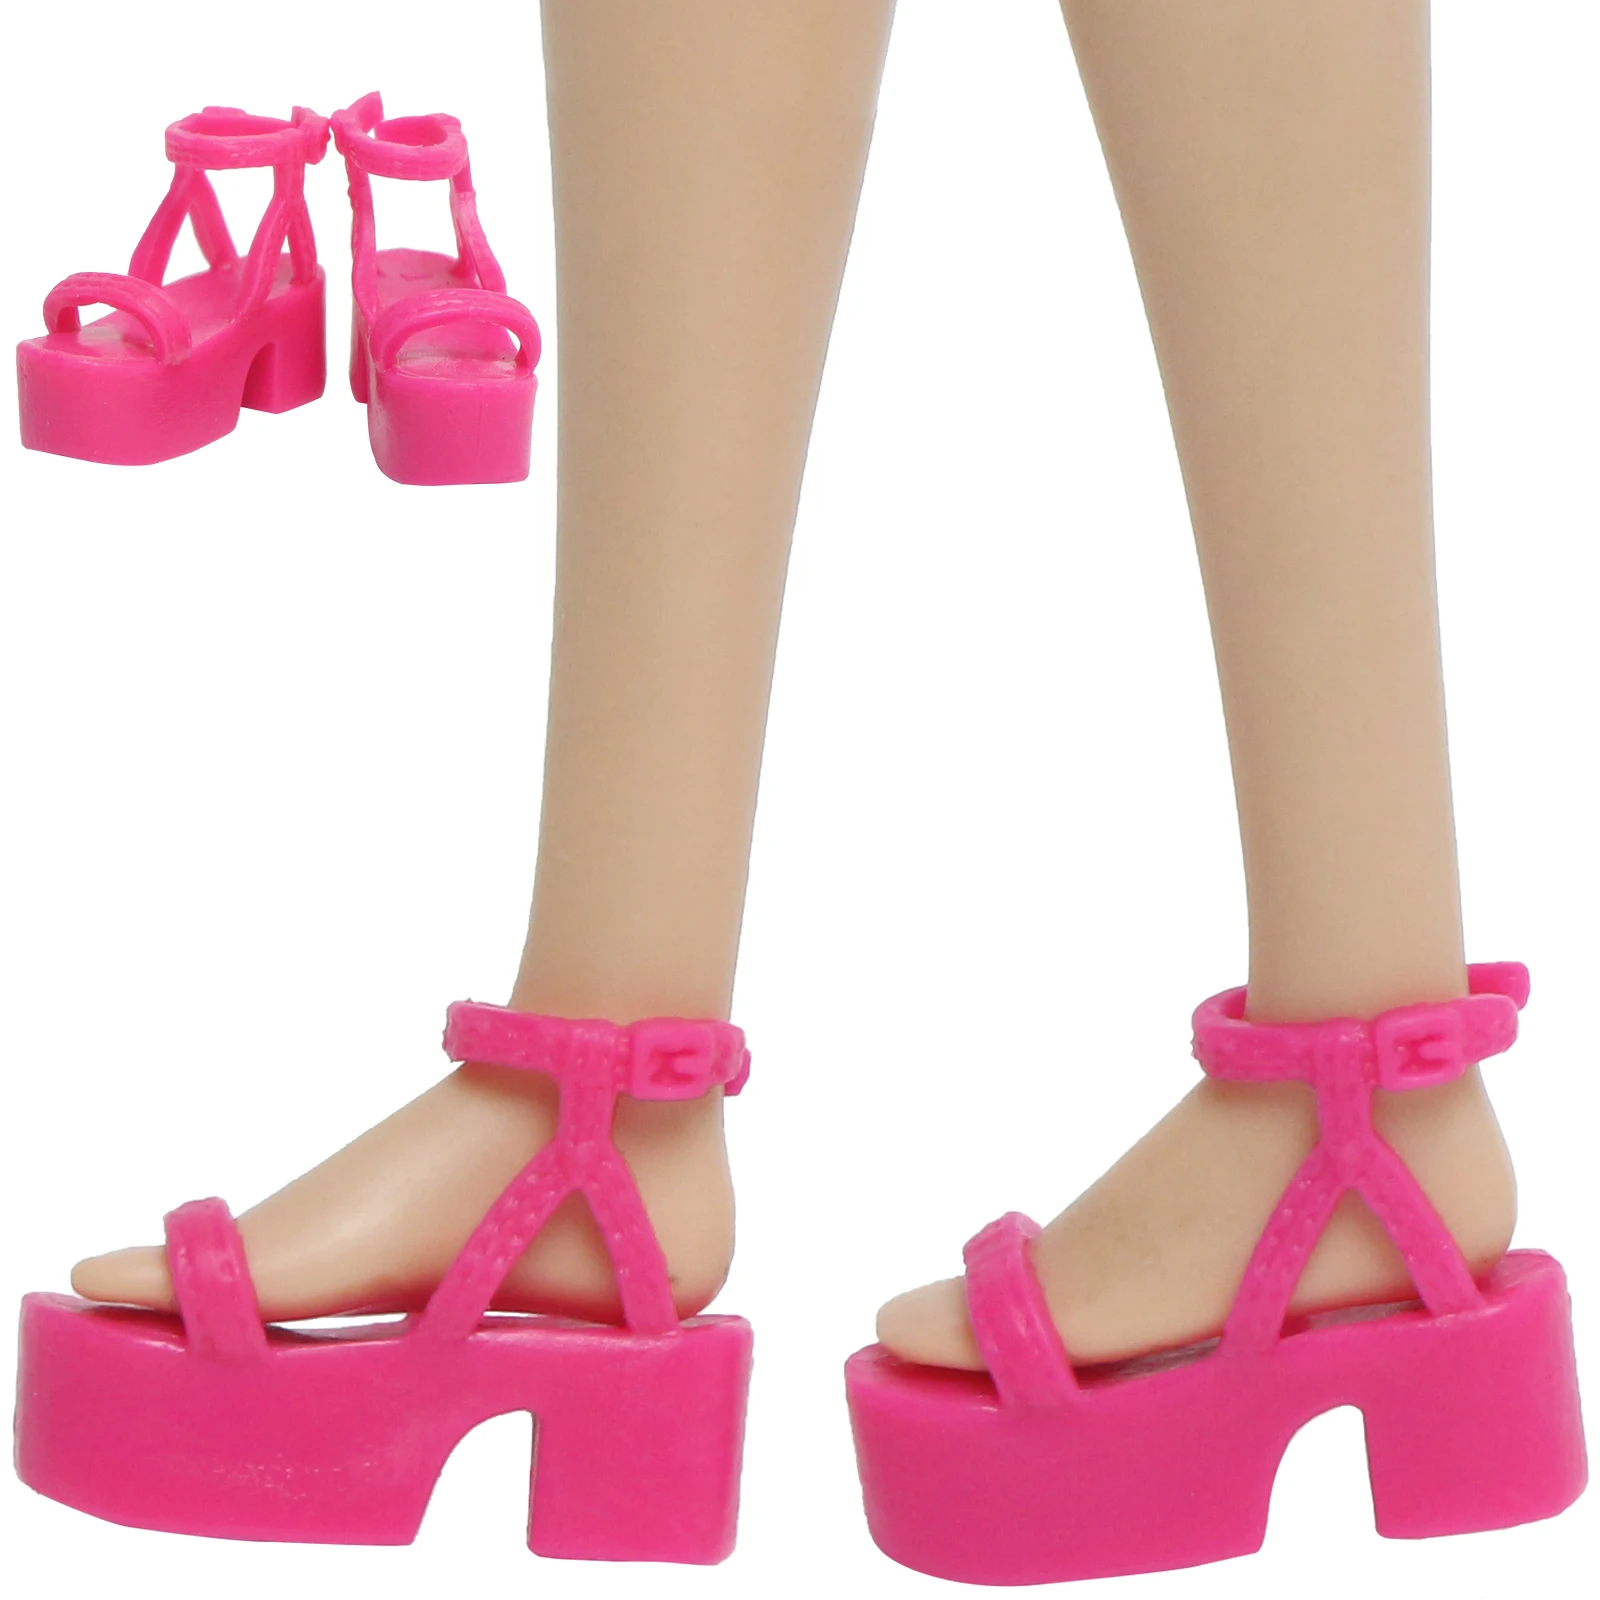 BARBIE DOLL PINK STRAPPY SANDALS HIGH HEEL SHOES FITS FASHIONISTA MY SCENE MODEL 